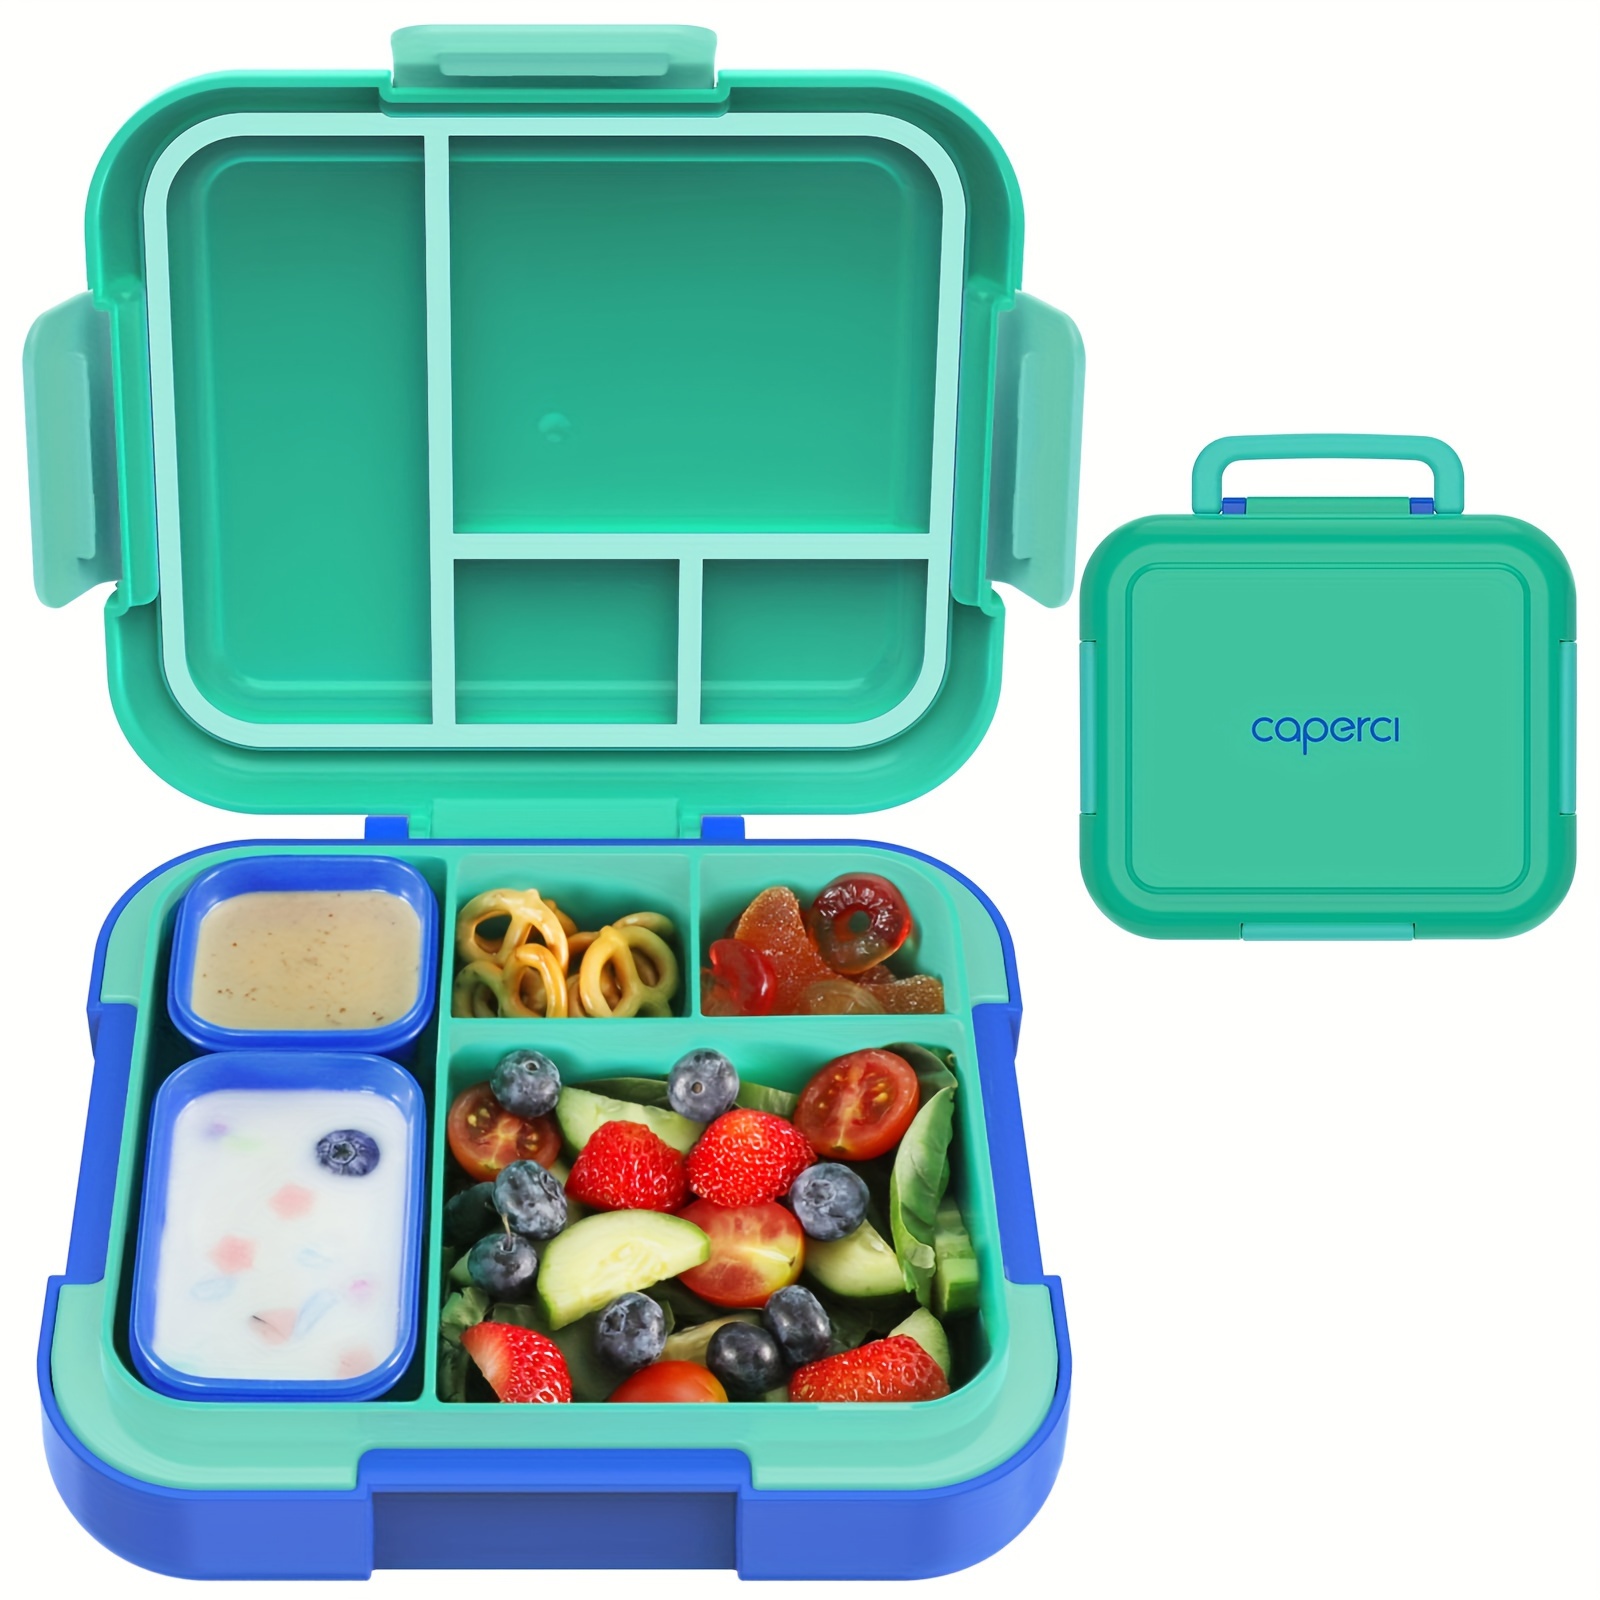 

1pc, Bento Box- Larges Lunch Box With 2 Modular Containers - 4 Compartments, Leak-proof, Portable Handle, Microwave/dishwasher Safe, Bpa-free